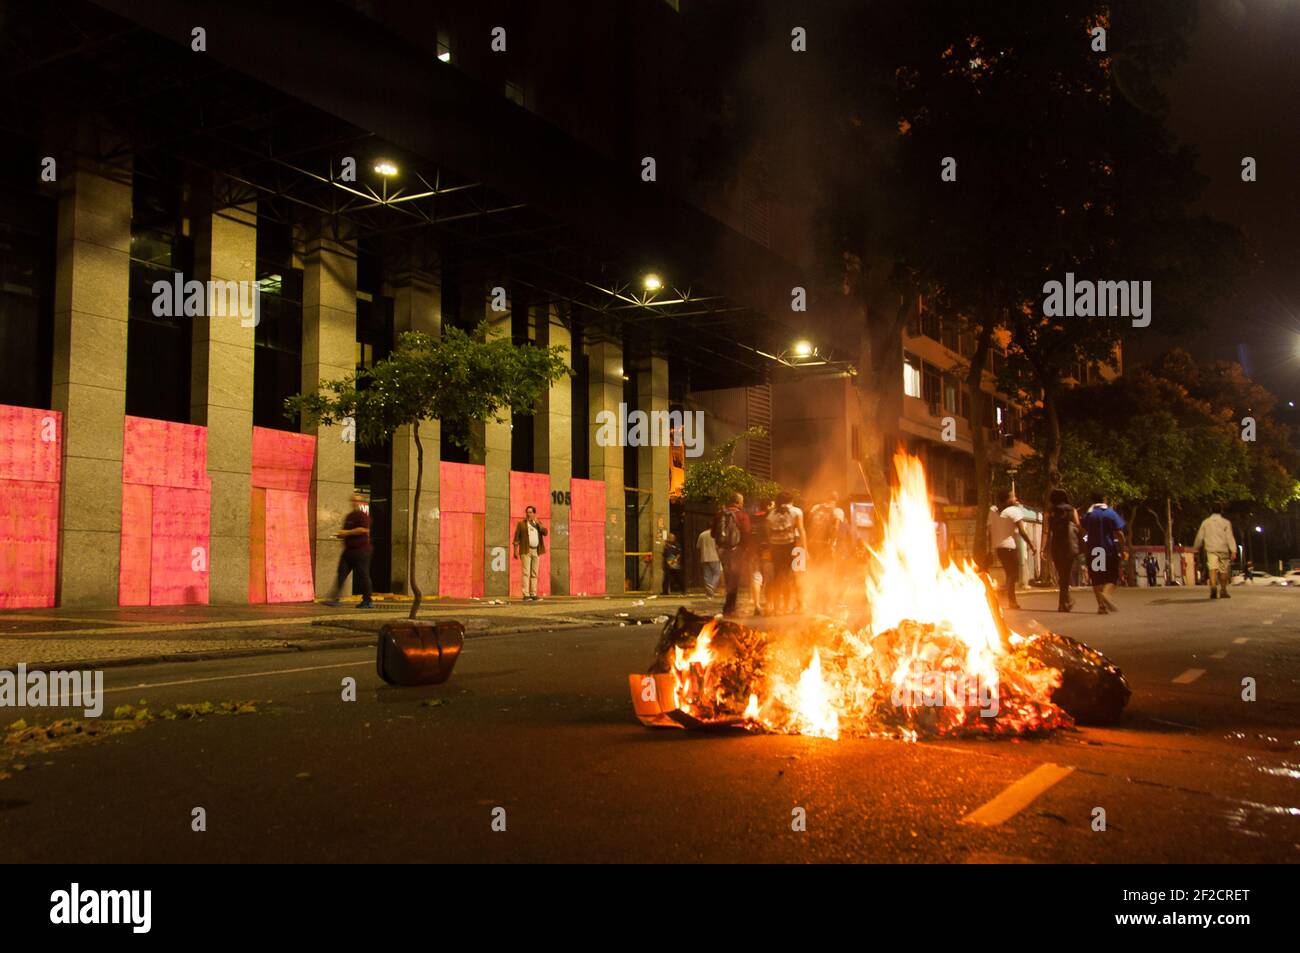 Rio de Janeiro, Brazil - 28 April, 2017: Chaos in the streets of Rio. Demonstrators have set the trash on fire. Massive strikes across the country. Stock Photo